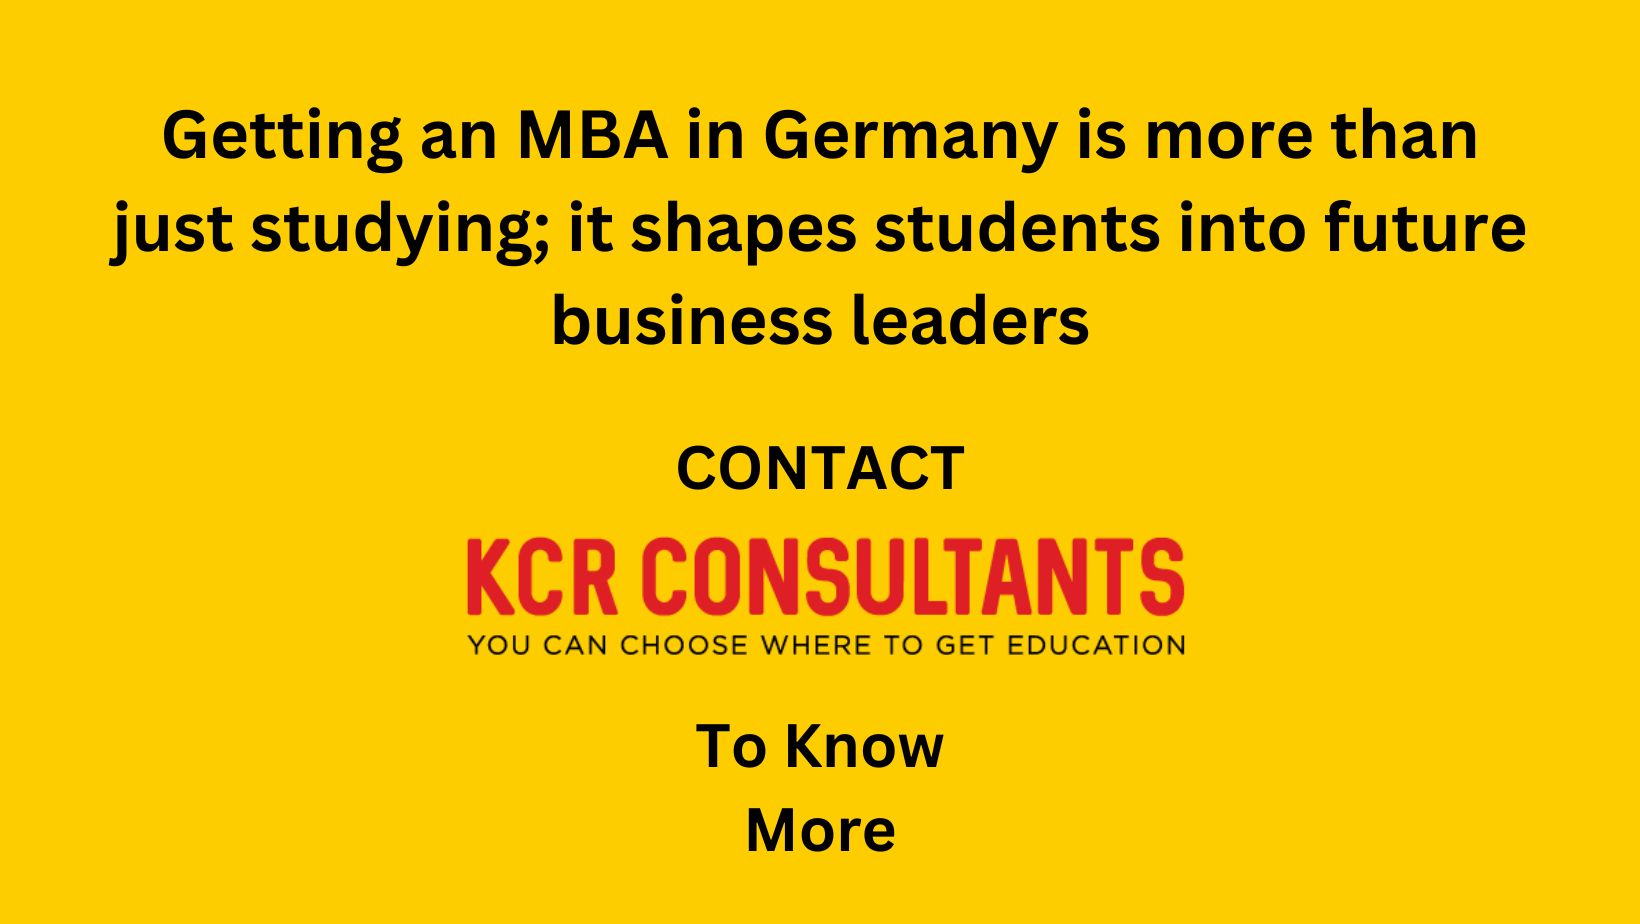 MBA From Germany - KCR CONSULTANTS - Contact US